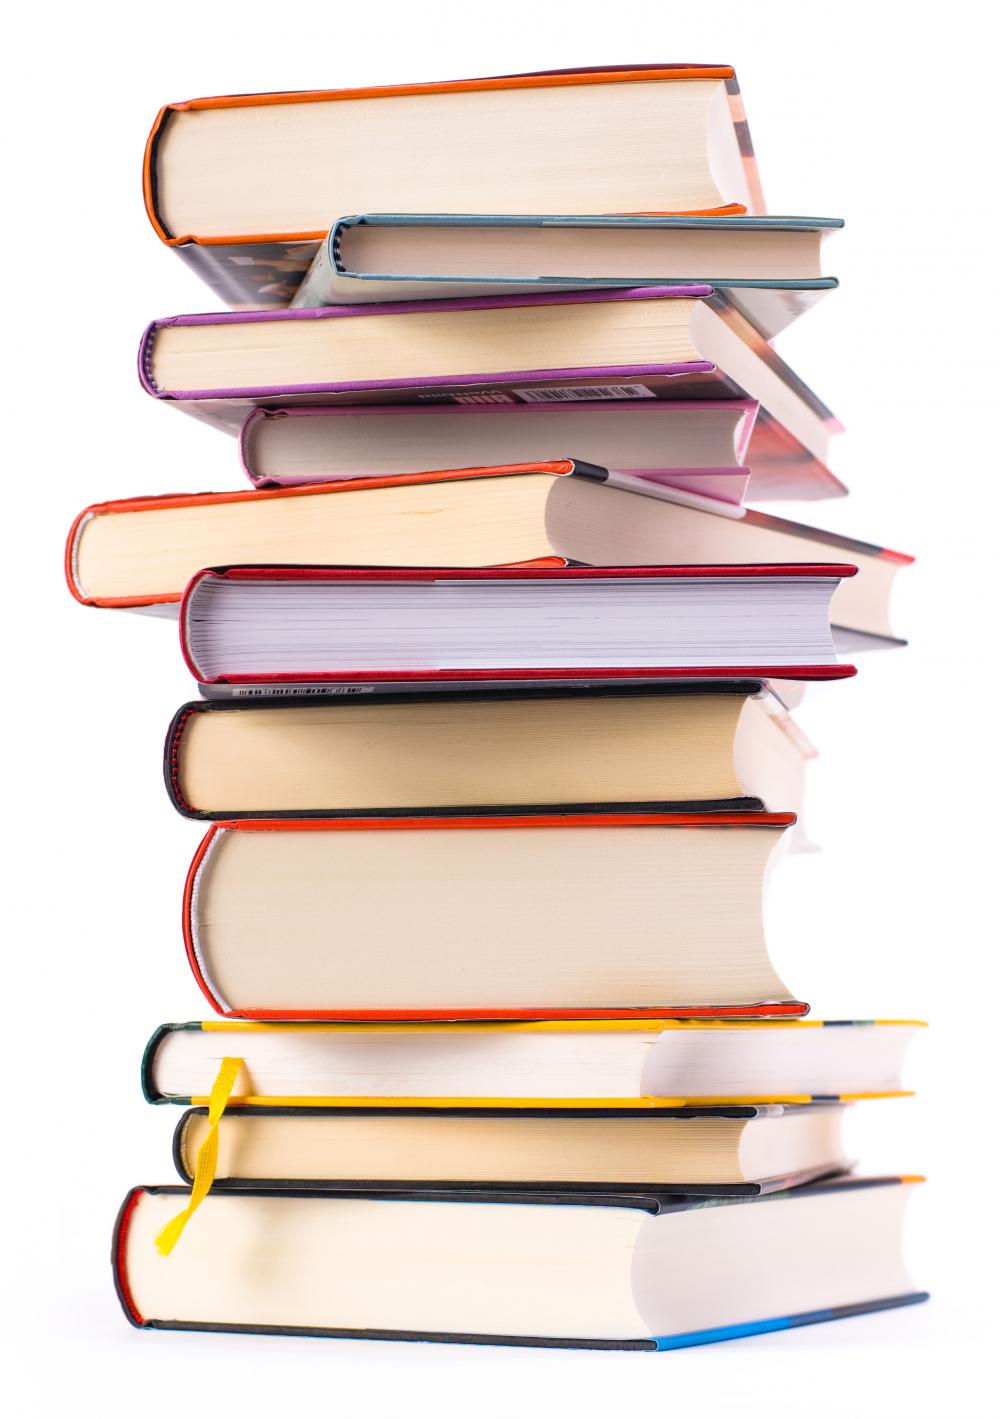 Stack Of Books Images | Clipart Panda - Free Clipart Images